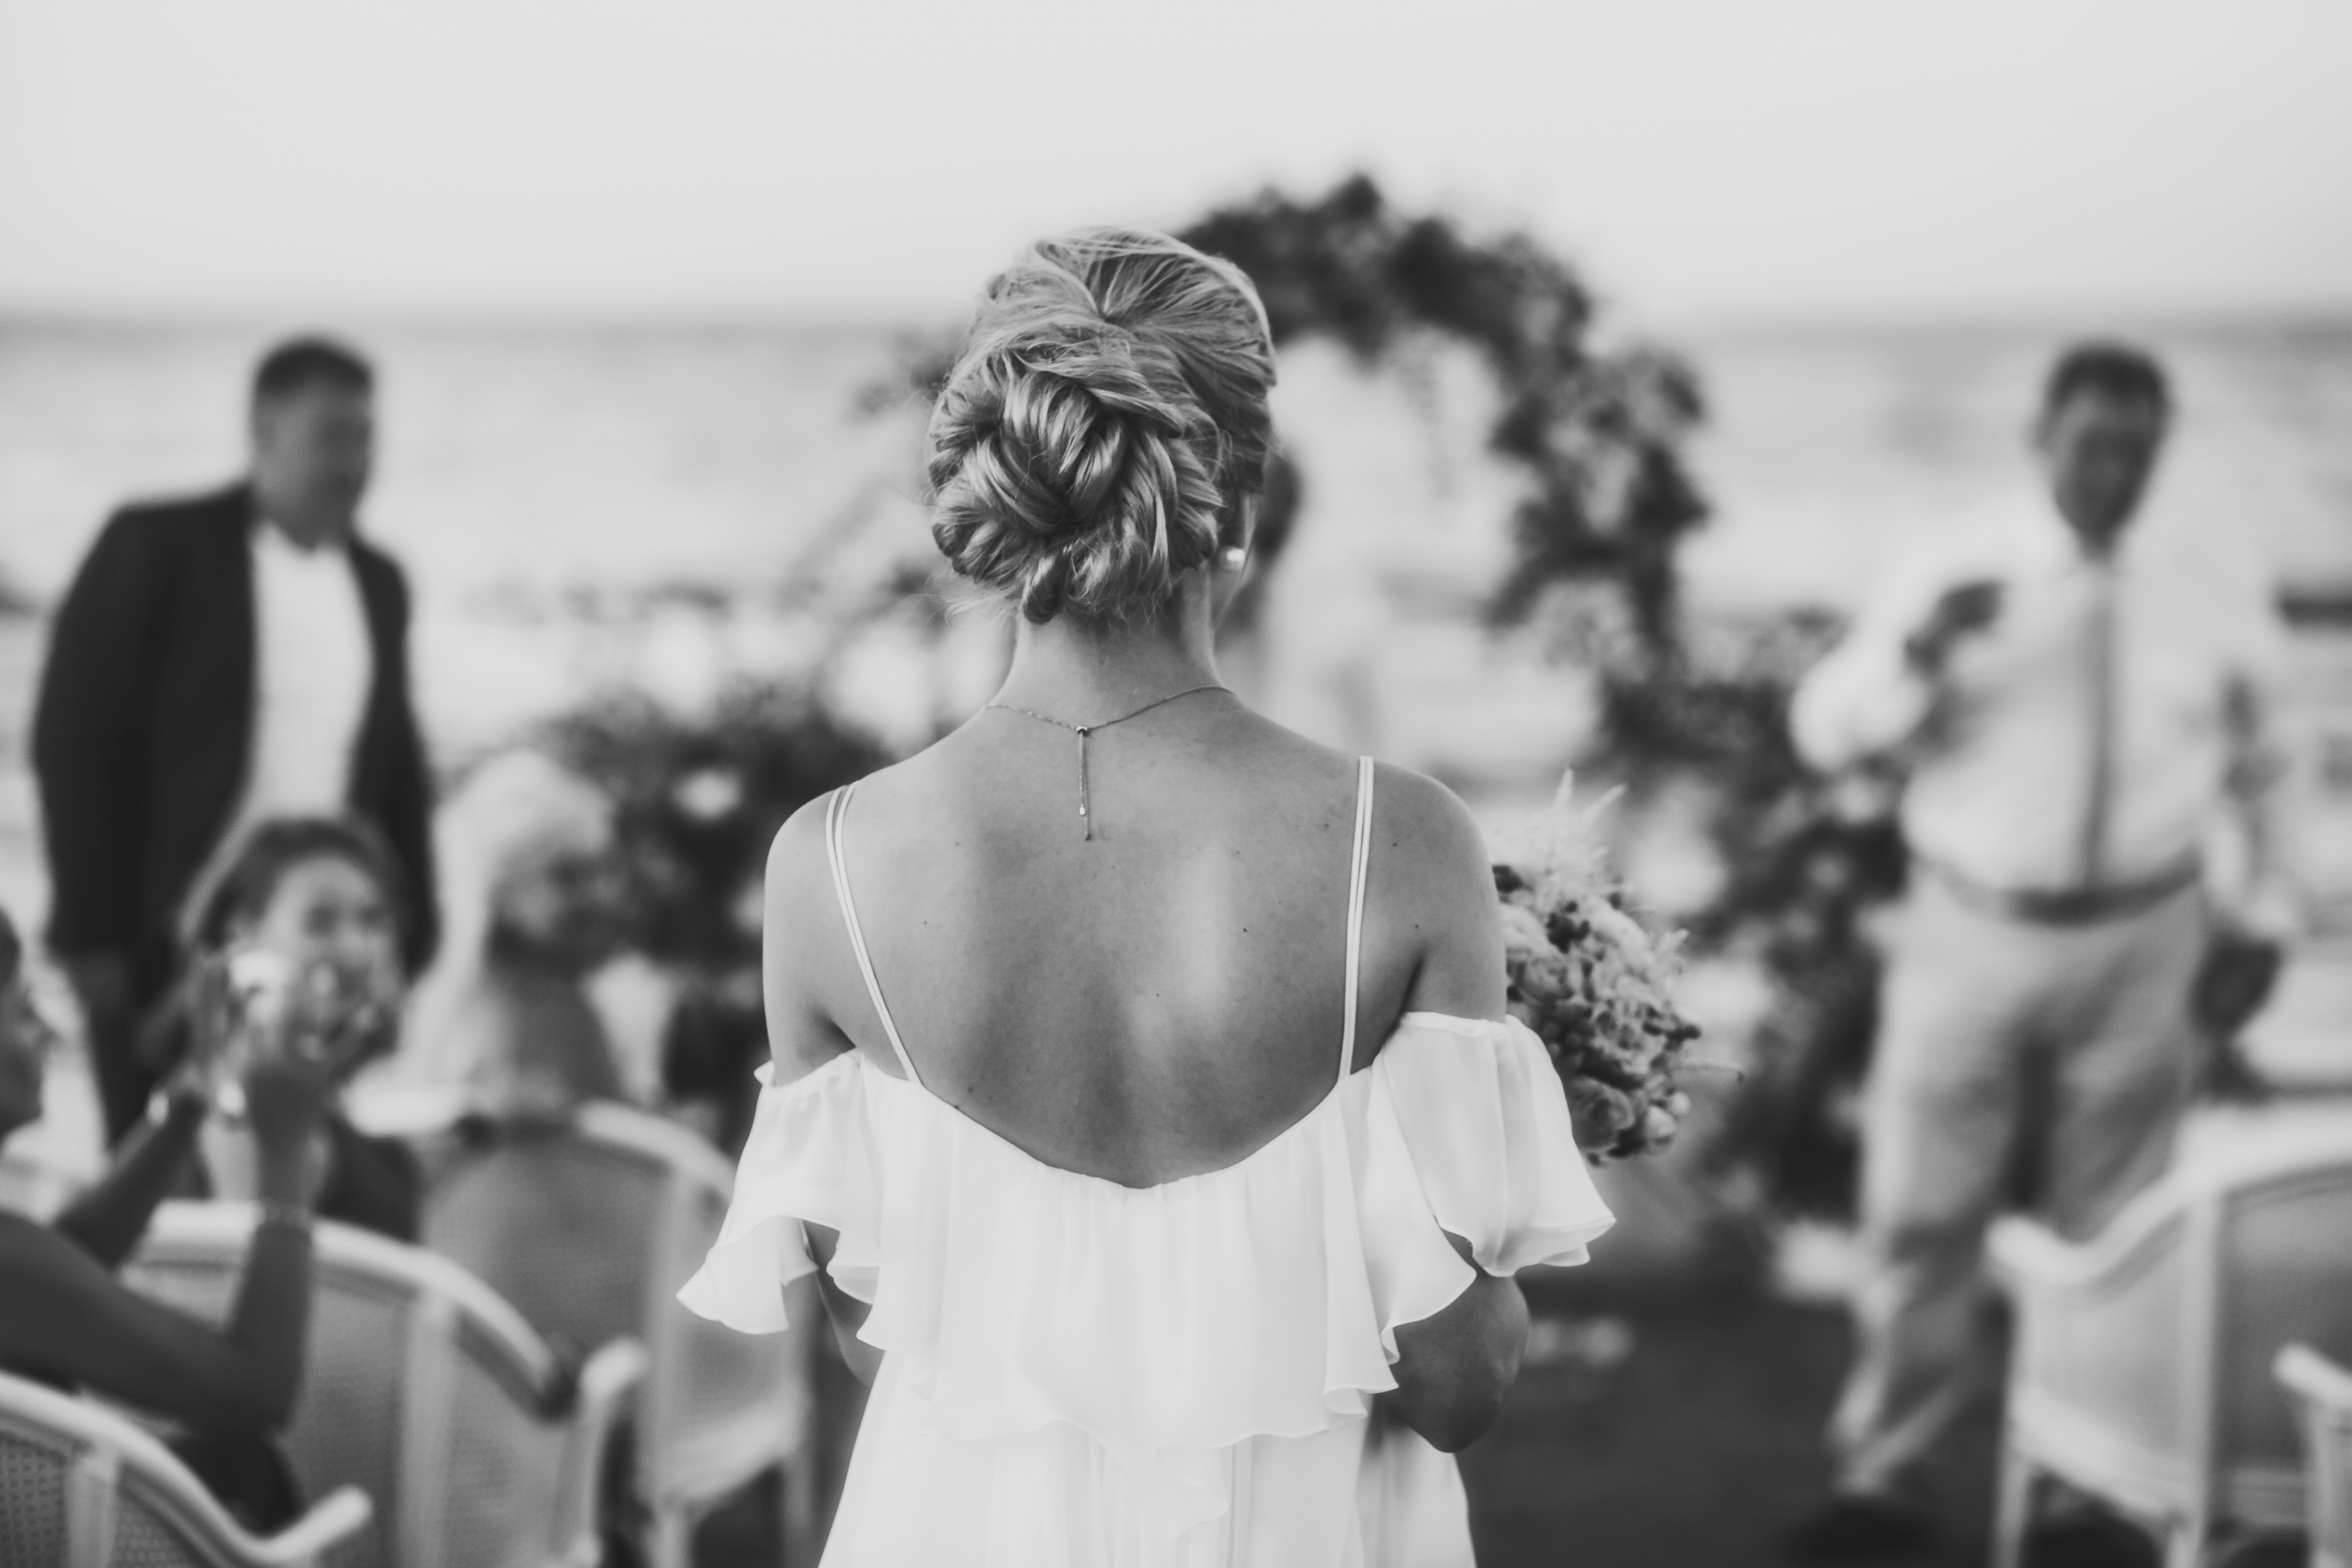 Back view of a bride walking down the aisle | Source: Shutterstock